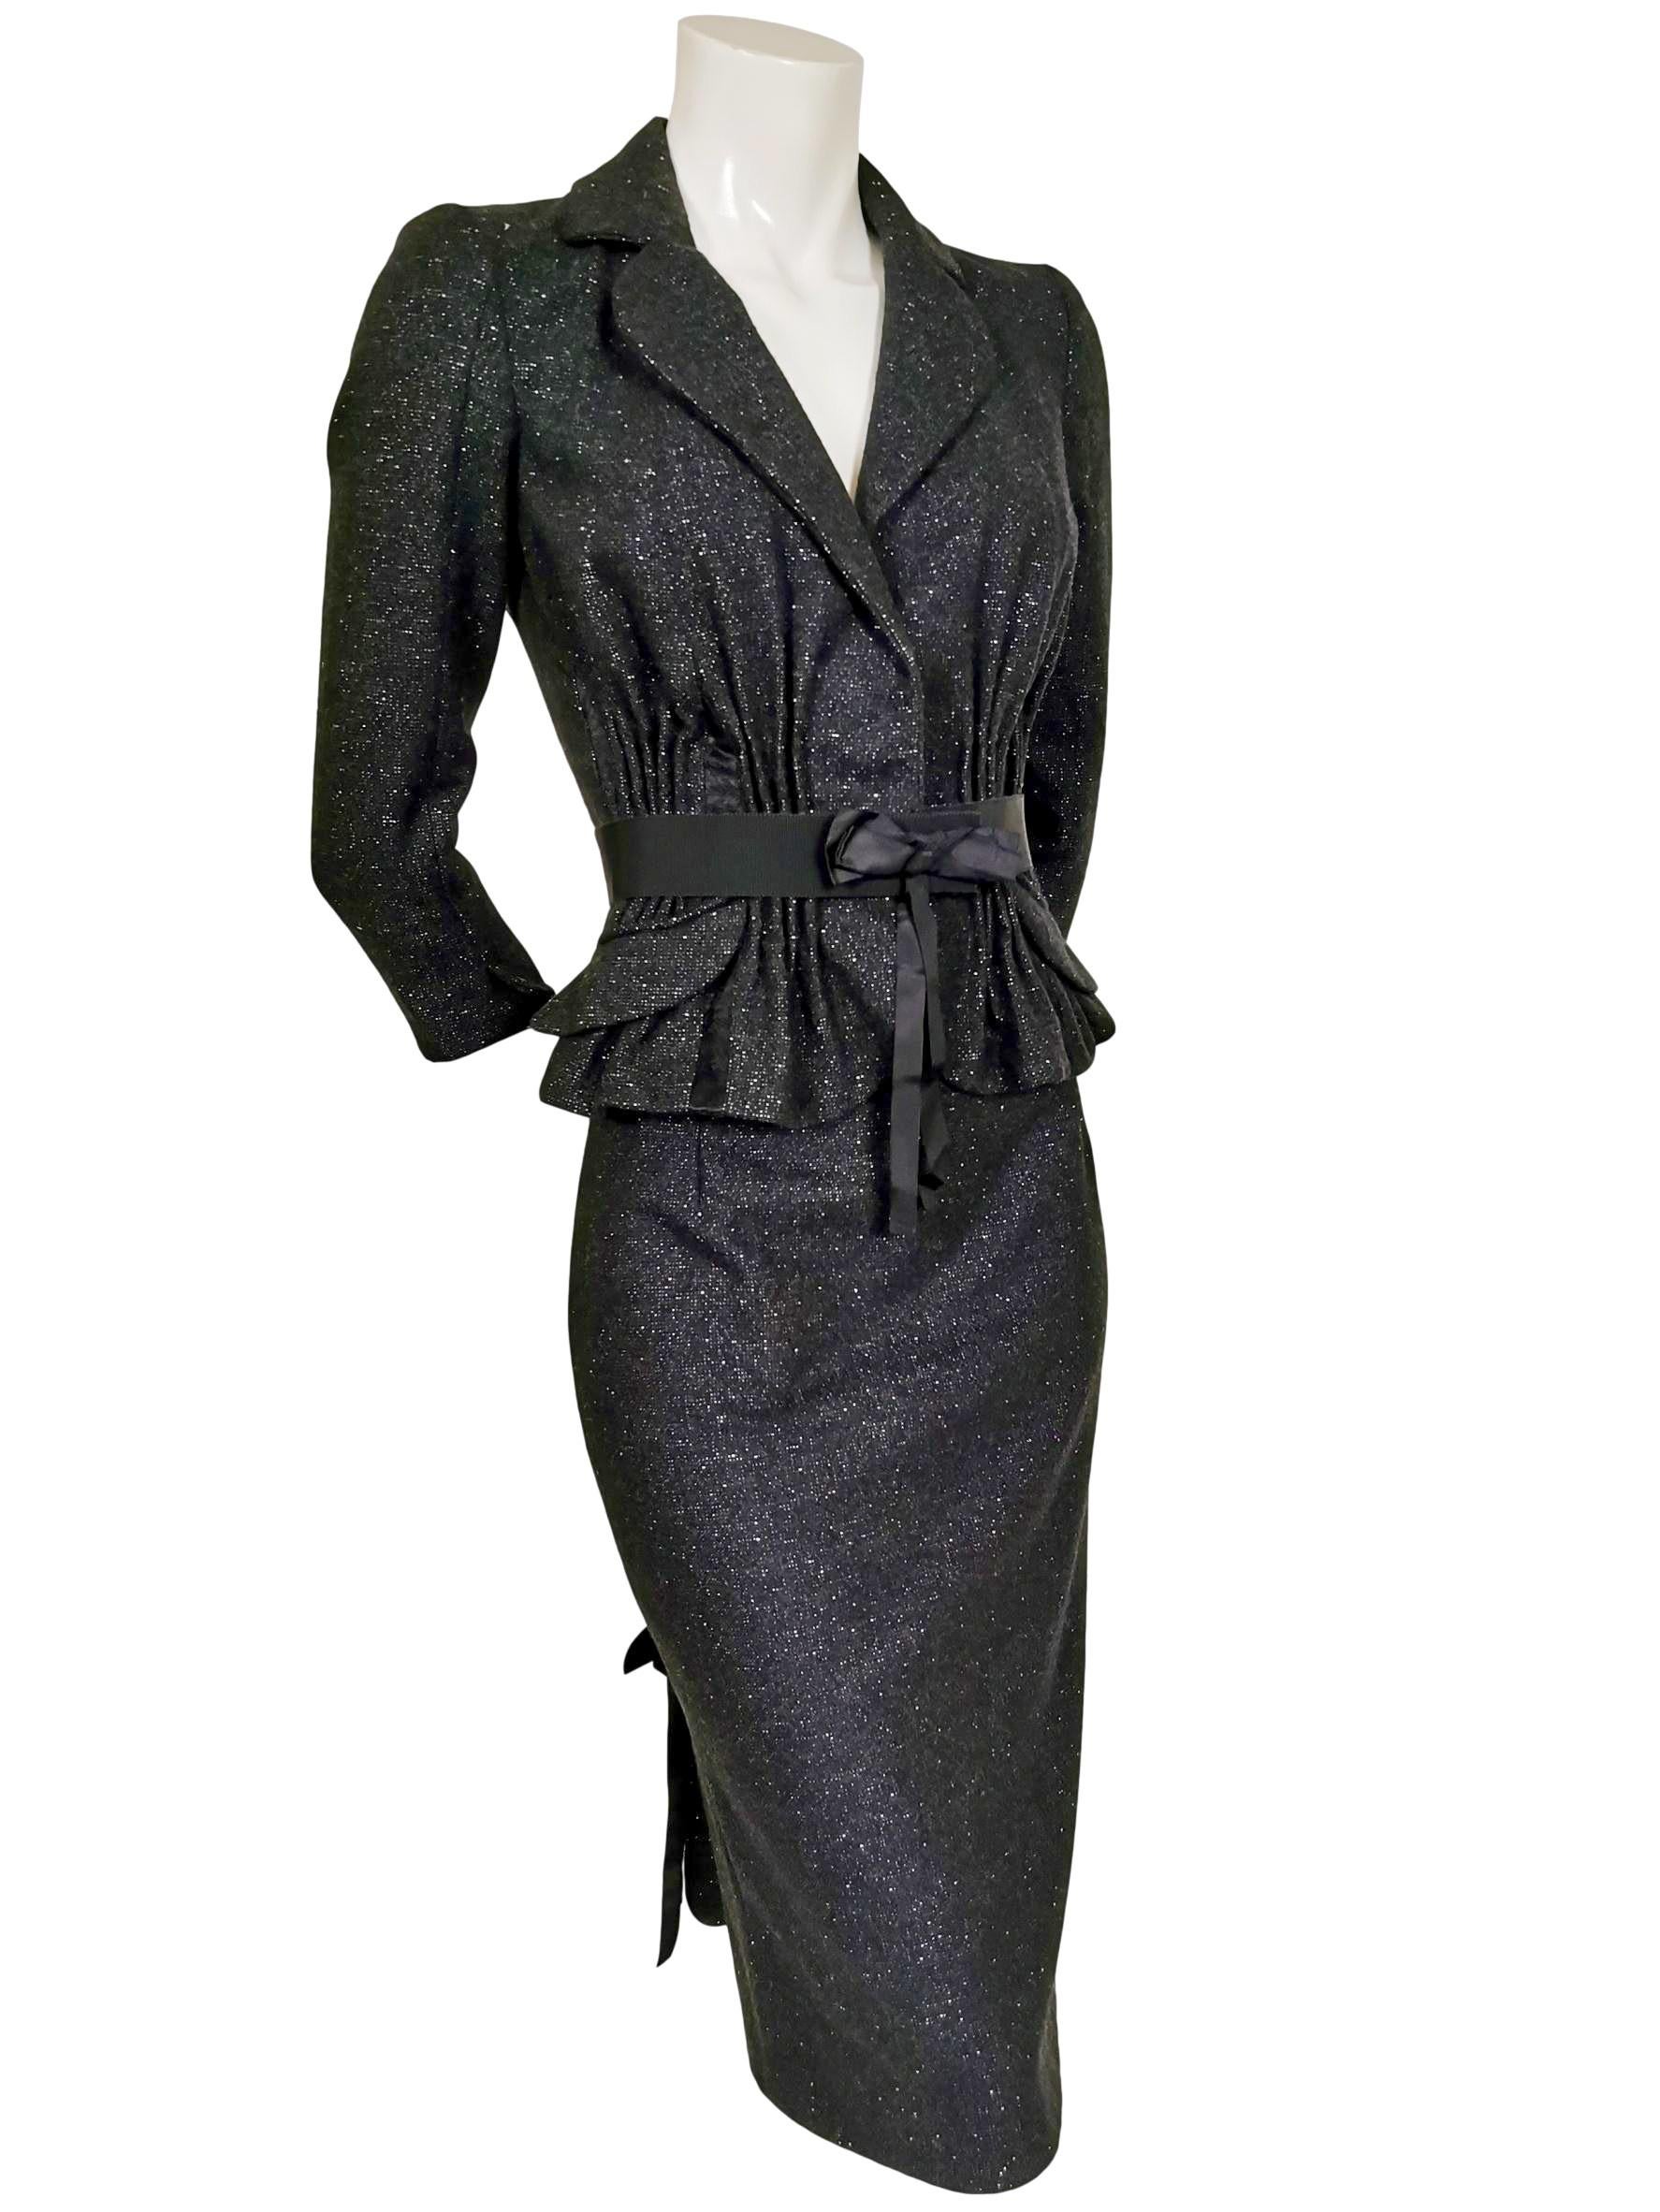 John Galliano Wool/Cashmere, Lace and Ribbon Skirt Suit A/W 2011 In Excellent Condition For Sale In Bath, GB